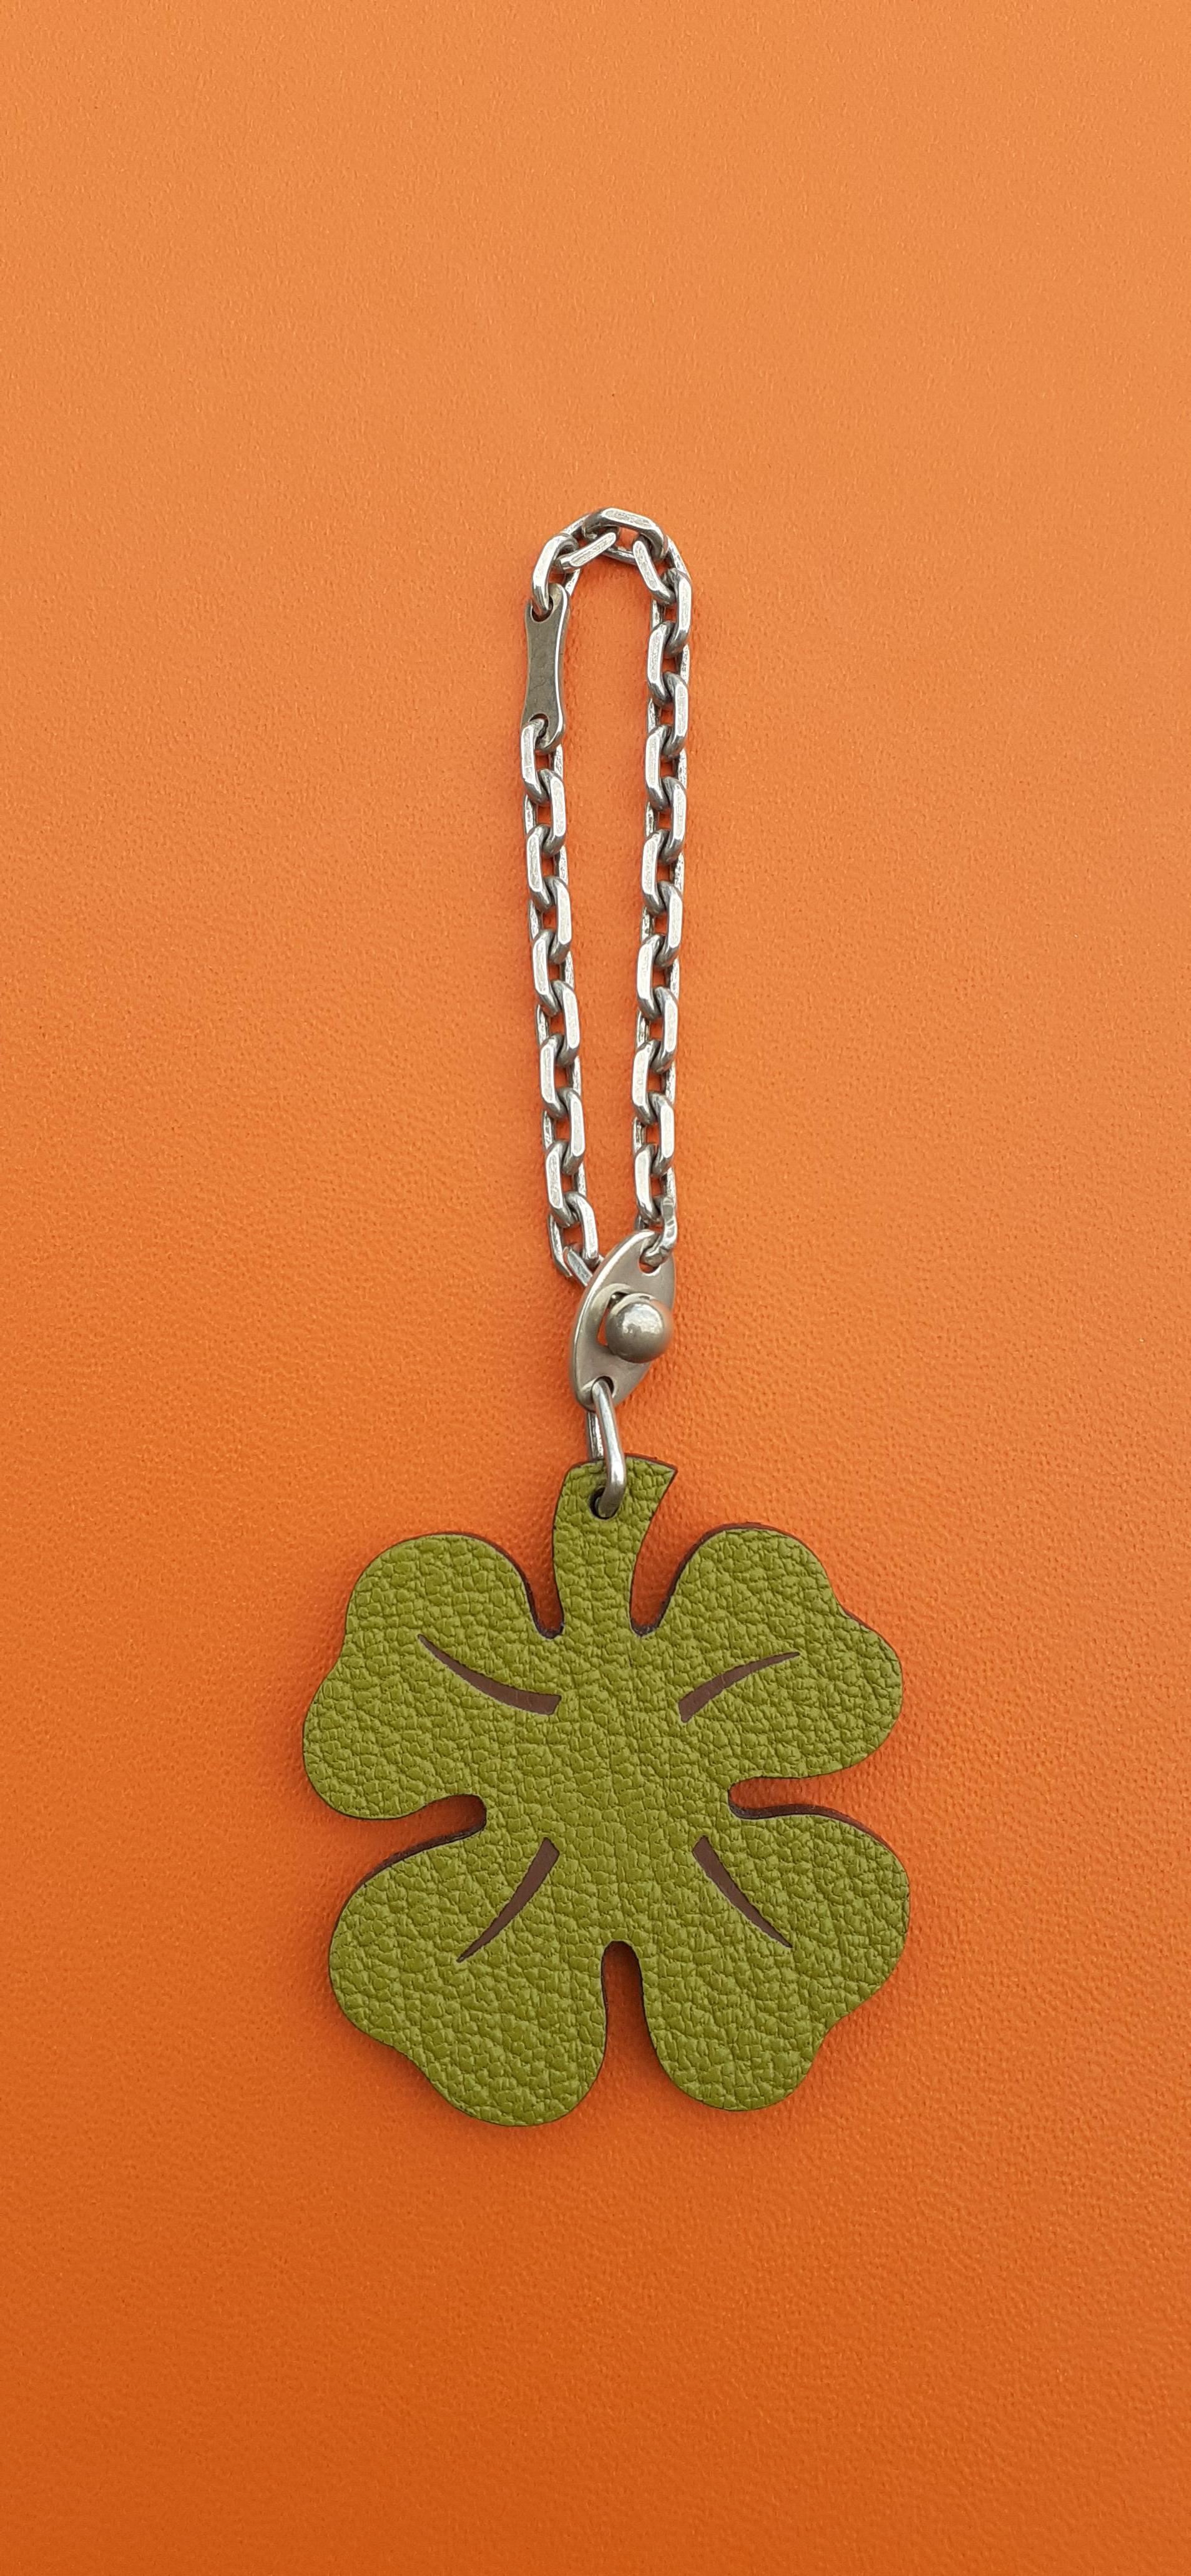 Super Cute Authentic Hermès Key Holder

Can be used as Bag Charm for your Kelly, Birkin or other Hermès Bag, or as keychain

Pattern: 4-leaf Clover

Made in France

Made of Grained Leather

Colorway: 1 side Green and Brown, Other side Plain